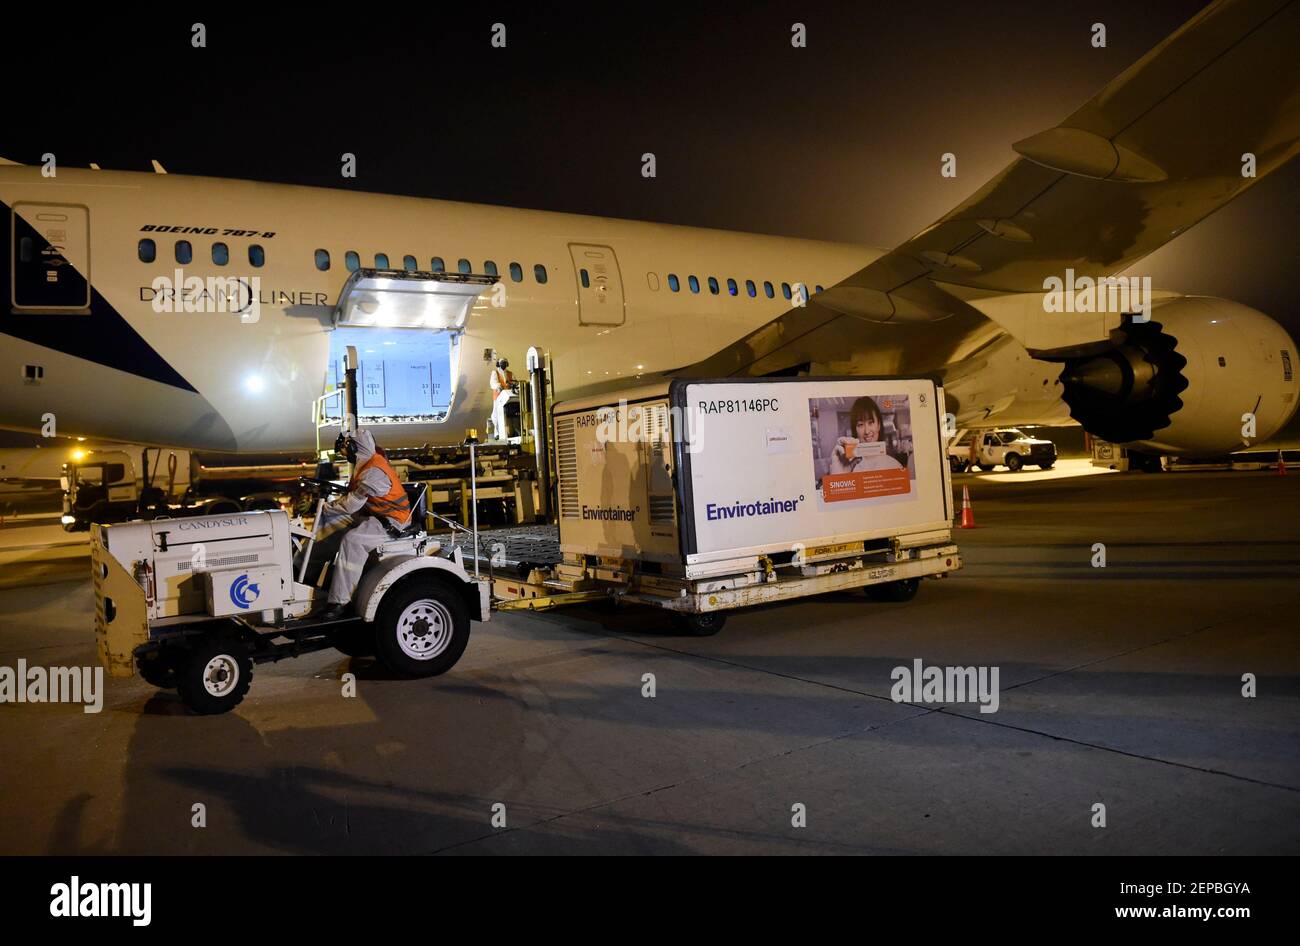 Montevideo, Uruguay. 25th Feb, 2021. A worker transfers the first batch of COVID-19 vaccines made by Chinese pharmaceutical firm Sinovac on its arrival in Montevideo, Uruguay, Feb. 25, 2021. Uruguayan President Luis Lacalle Pou on Friday thanked China for its support in providing COVID-19 vaccines. Lacalle Pou expressed the gratitude during a meeting with Chinese Ambassador to Uruguay Wang Gang, according to Secretary of the Presidency Alvaro Delgado. Credit: Nicolas Celaya/Xinhua/Alamy Live News Stock Photo